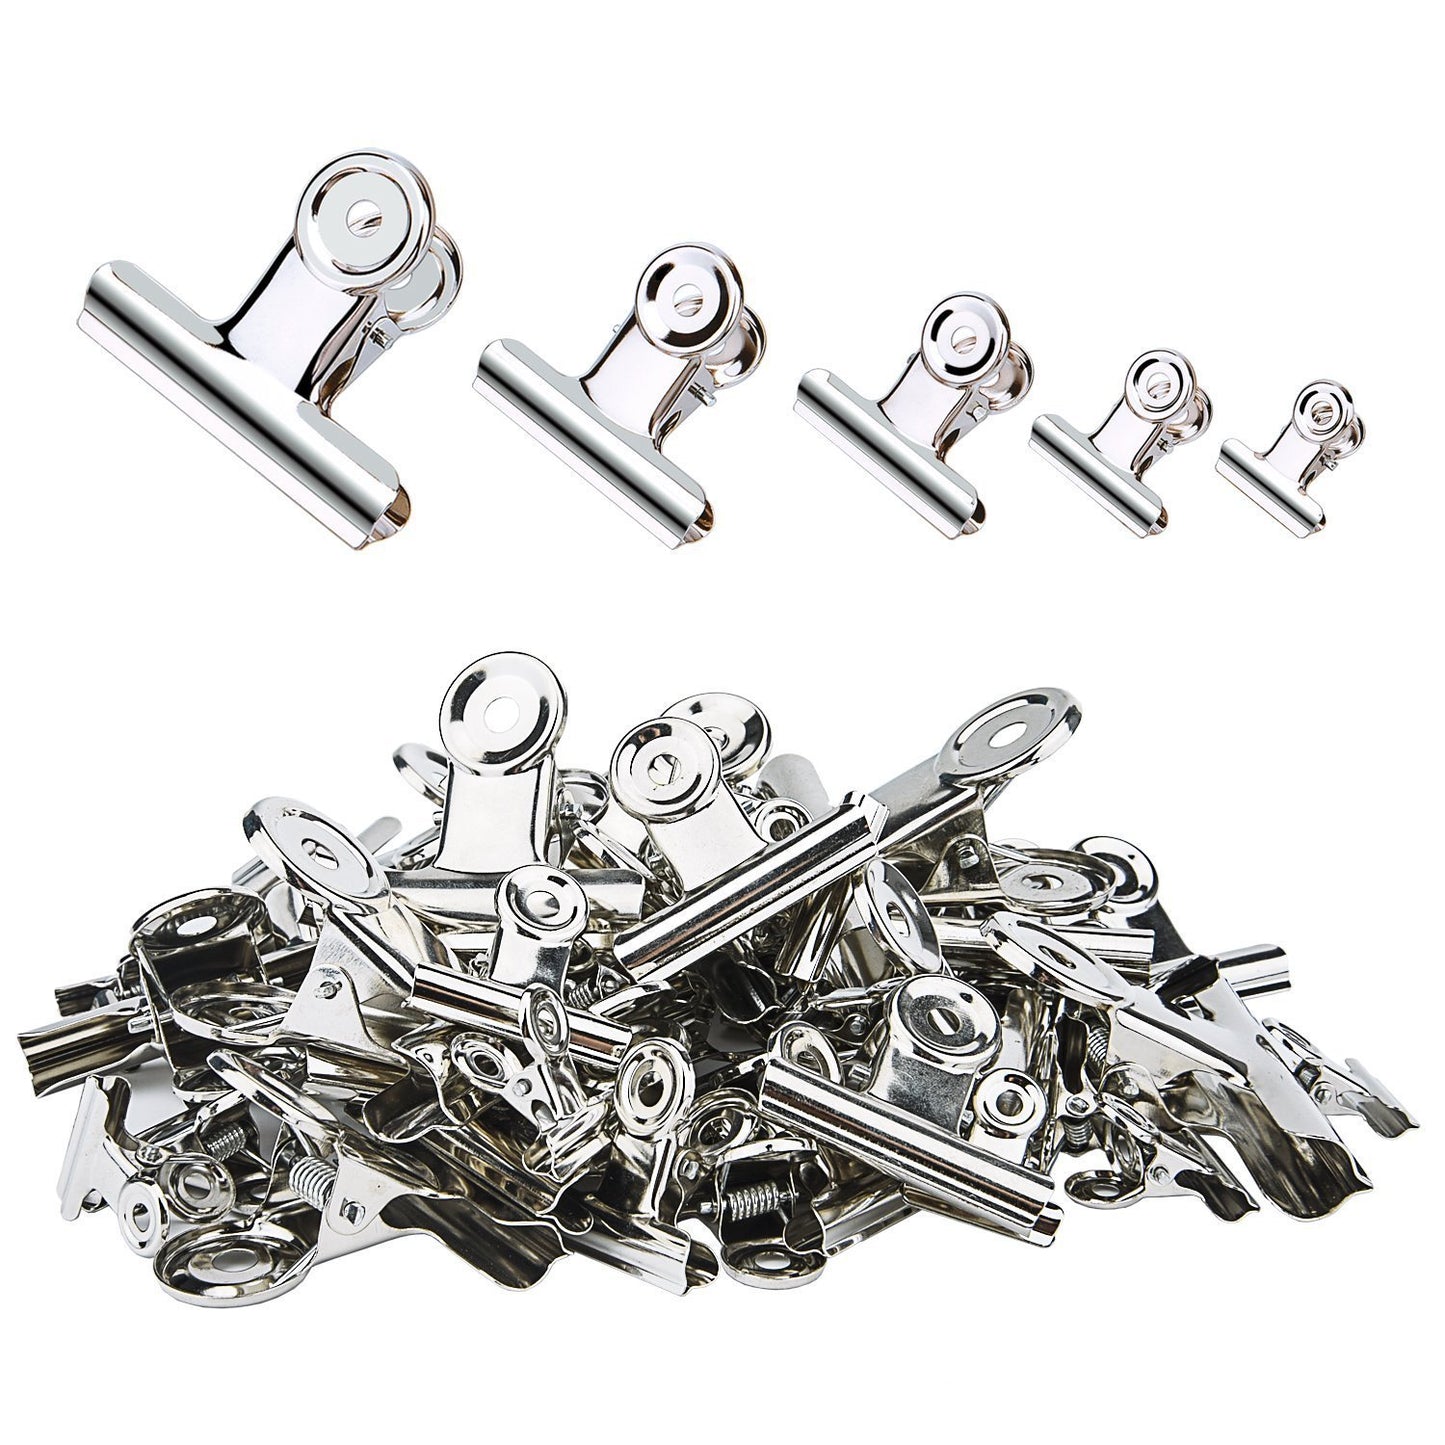 Top rated sunmns 60 pieces stainless steel clips heavy duty metal clip for photos bags kitchen home office usage 5 sizes 0 78 1 18 1 5 2 2 5 inch